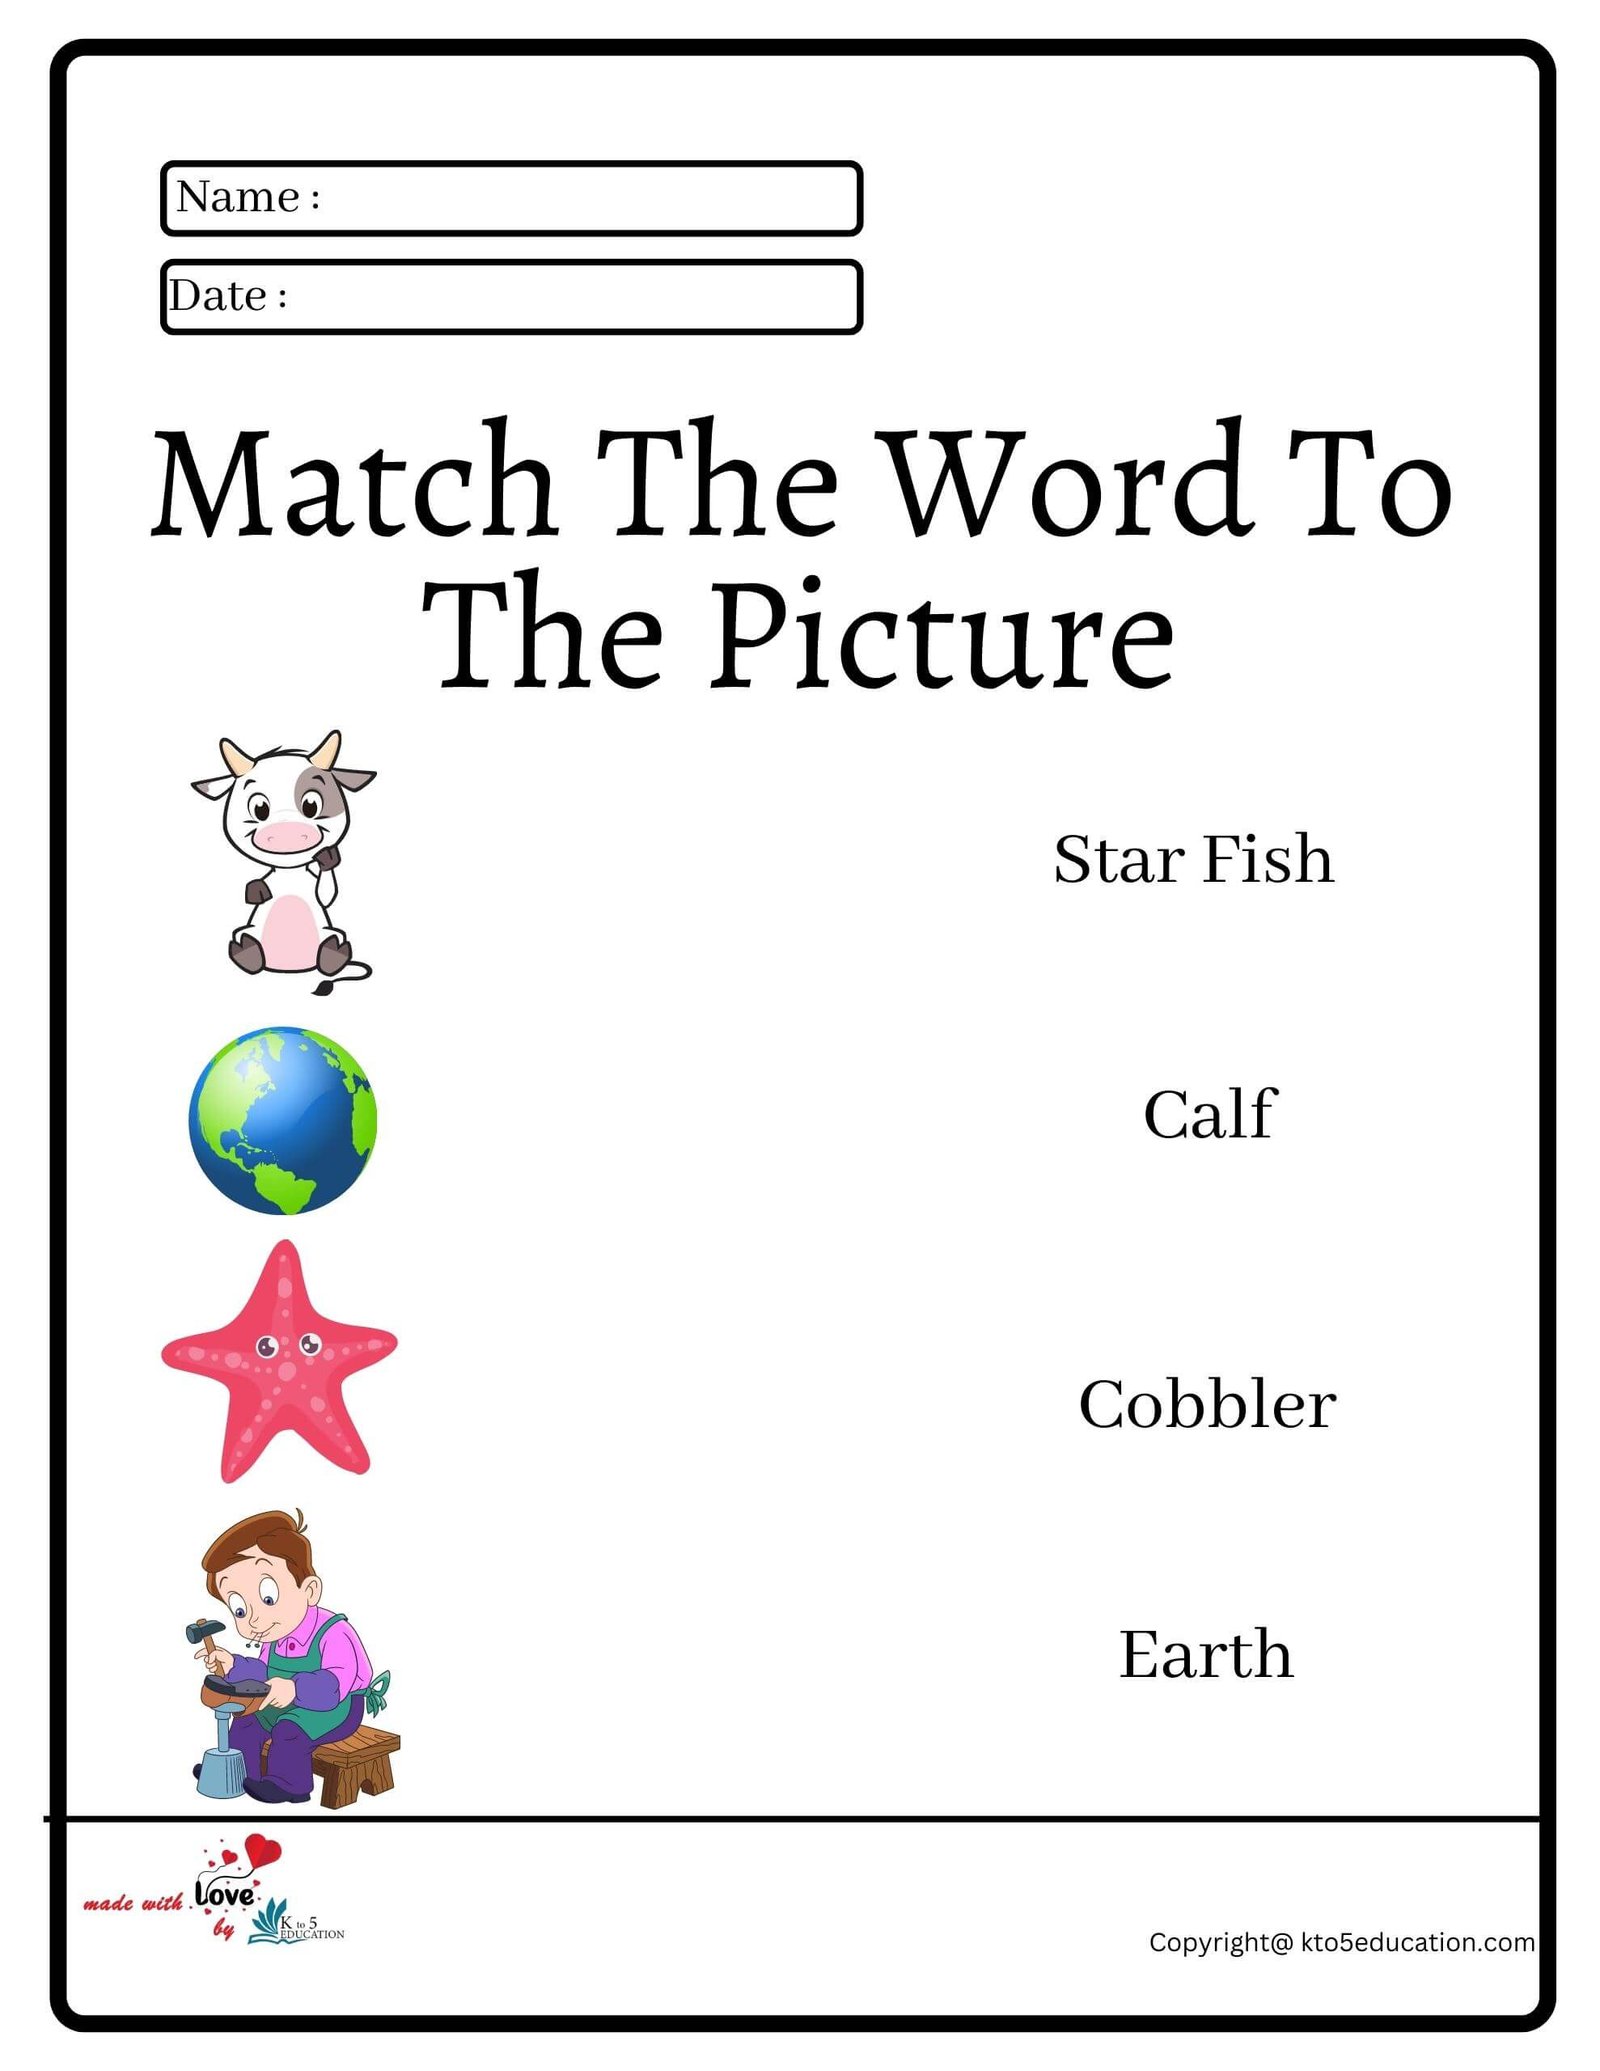 Match The Word To The Picture Worksheet